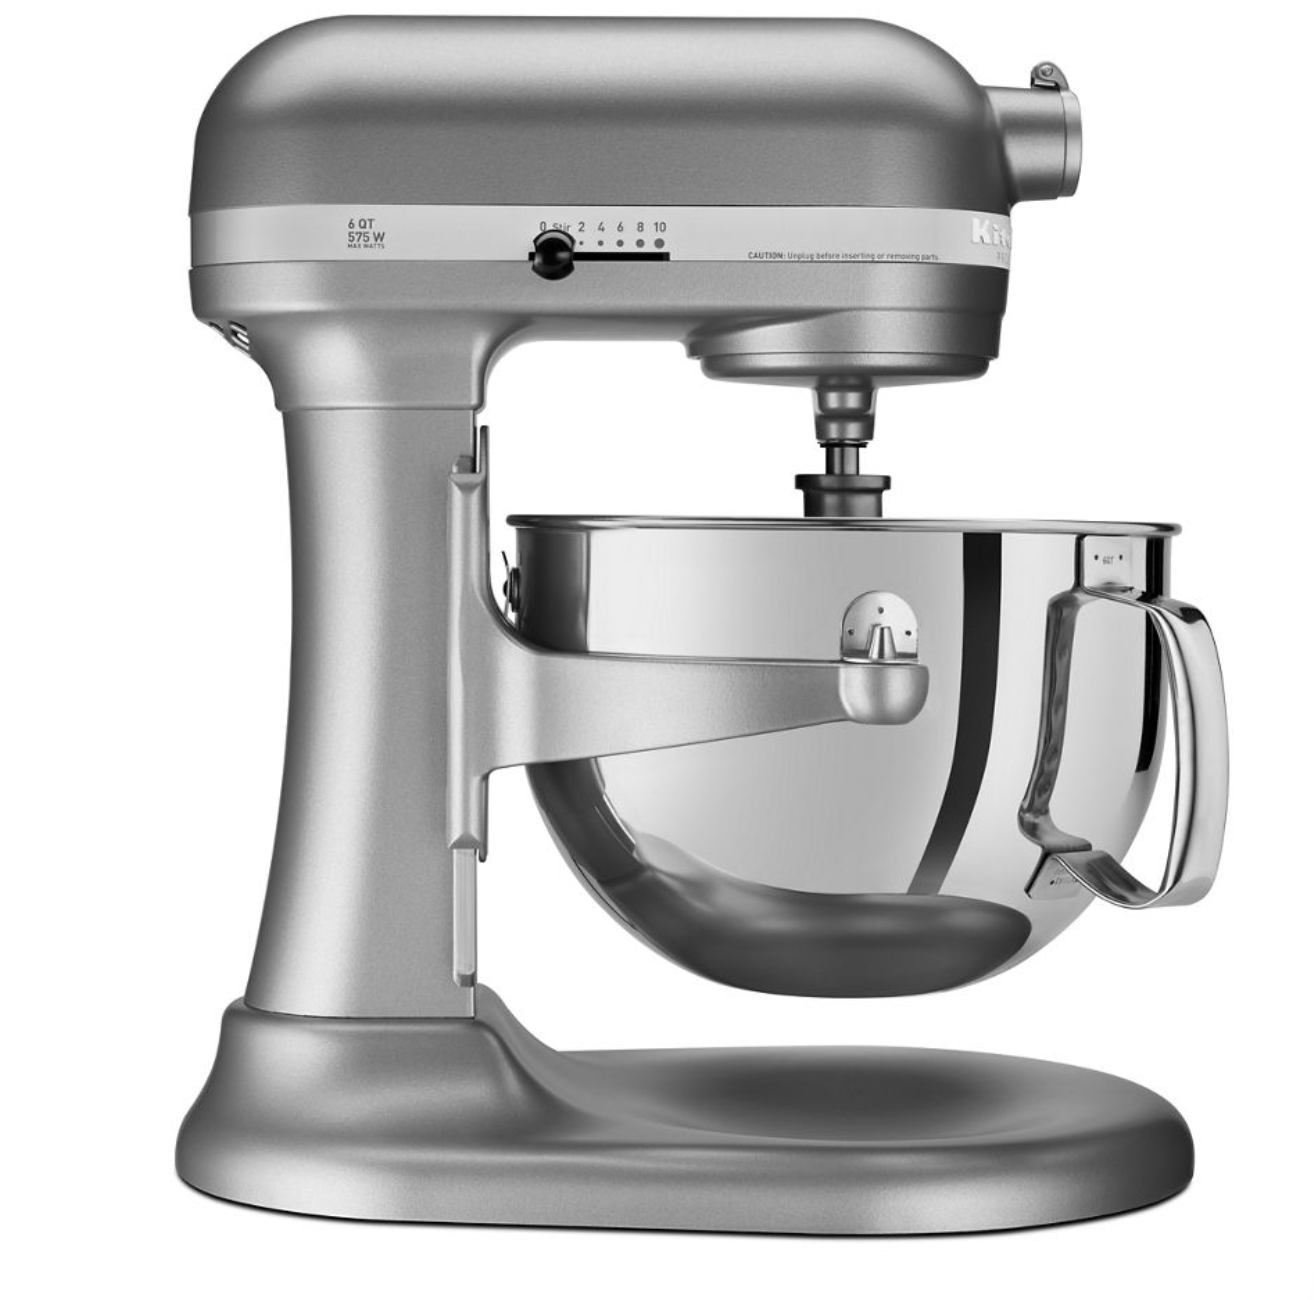 Tålmodighed prøve sovende 6Qt Professional 600 Series Mixer Silver – Breed and Co.